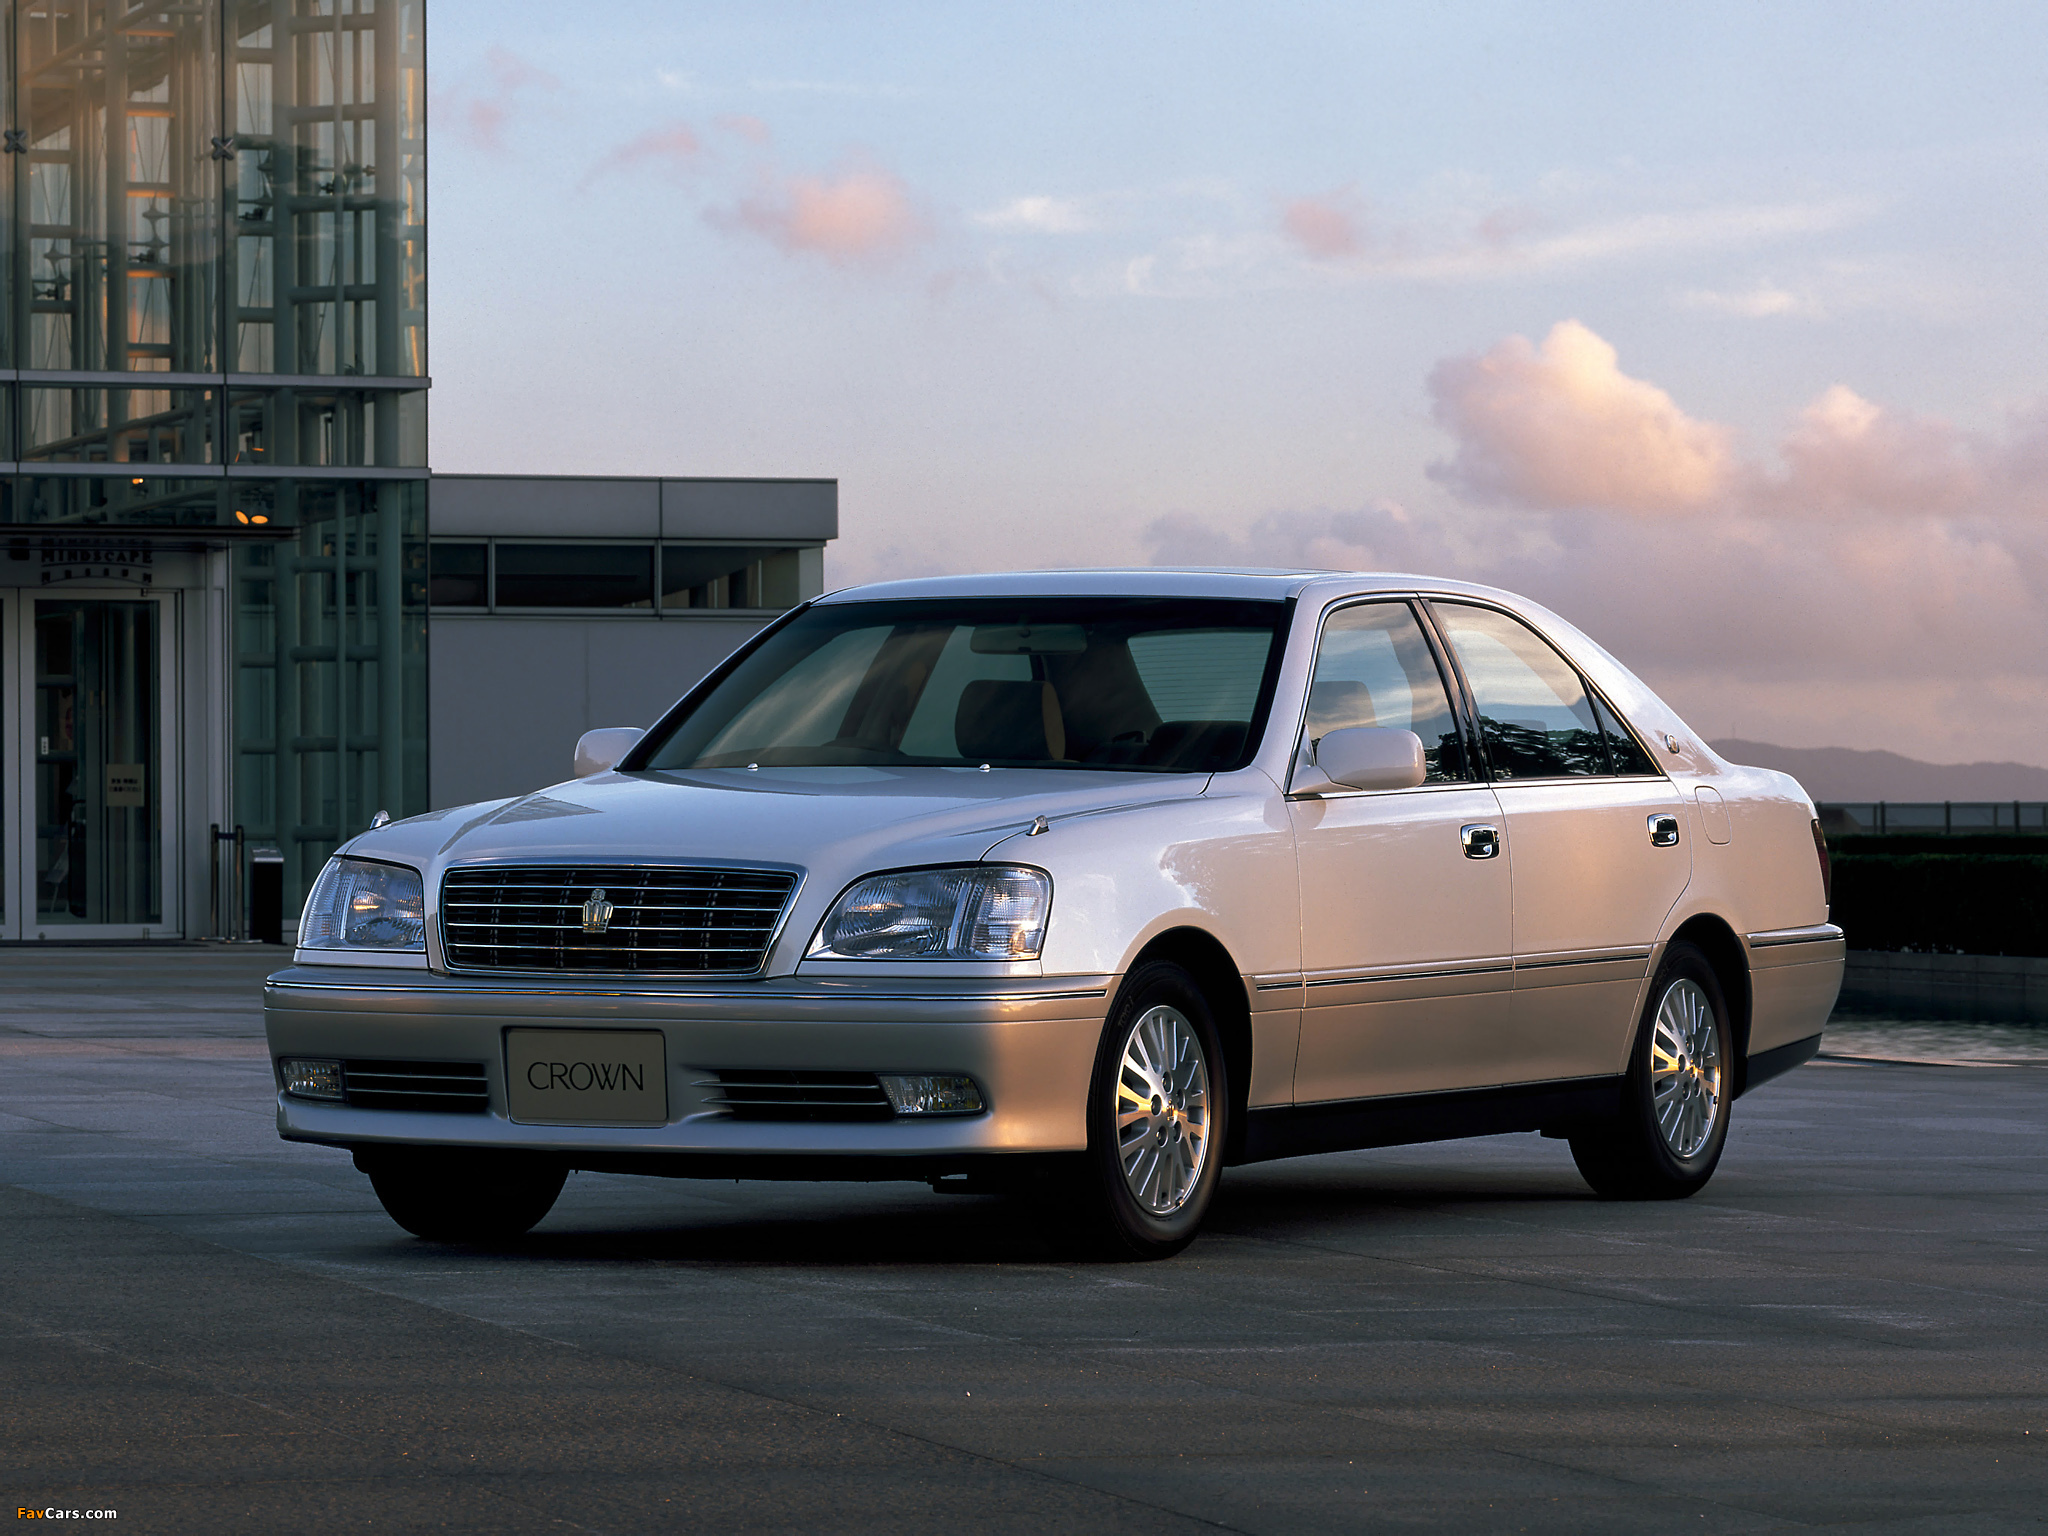 Toyota Crown Royal Saloon Wallpapers